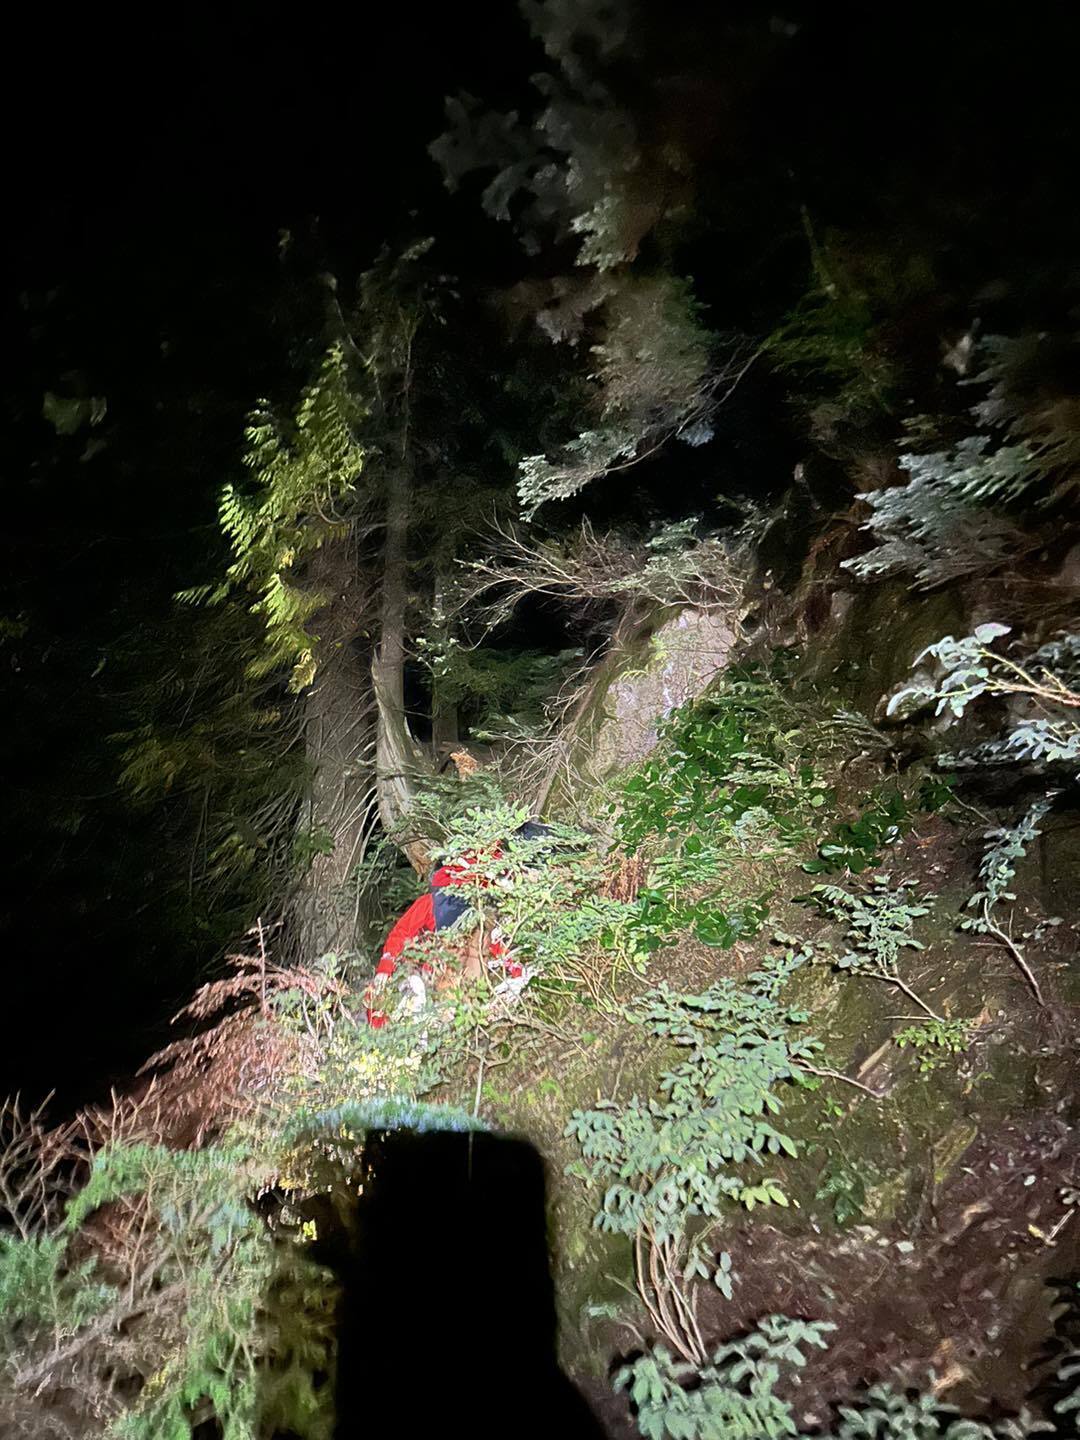 A tourist got stranded on a cliff because he took a non-existent path on Google Maps